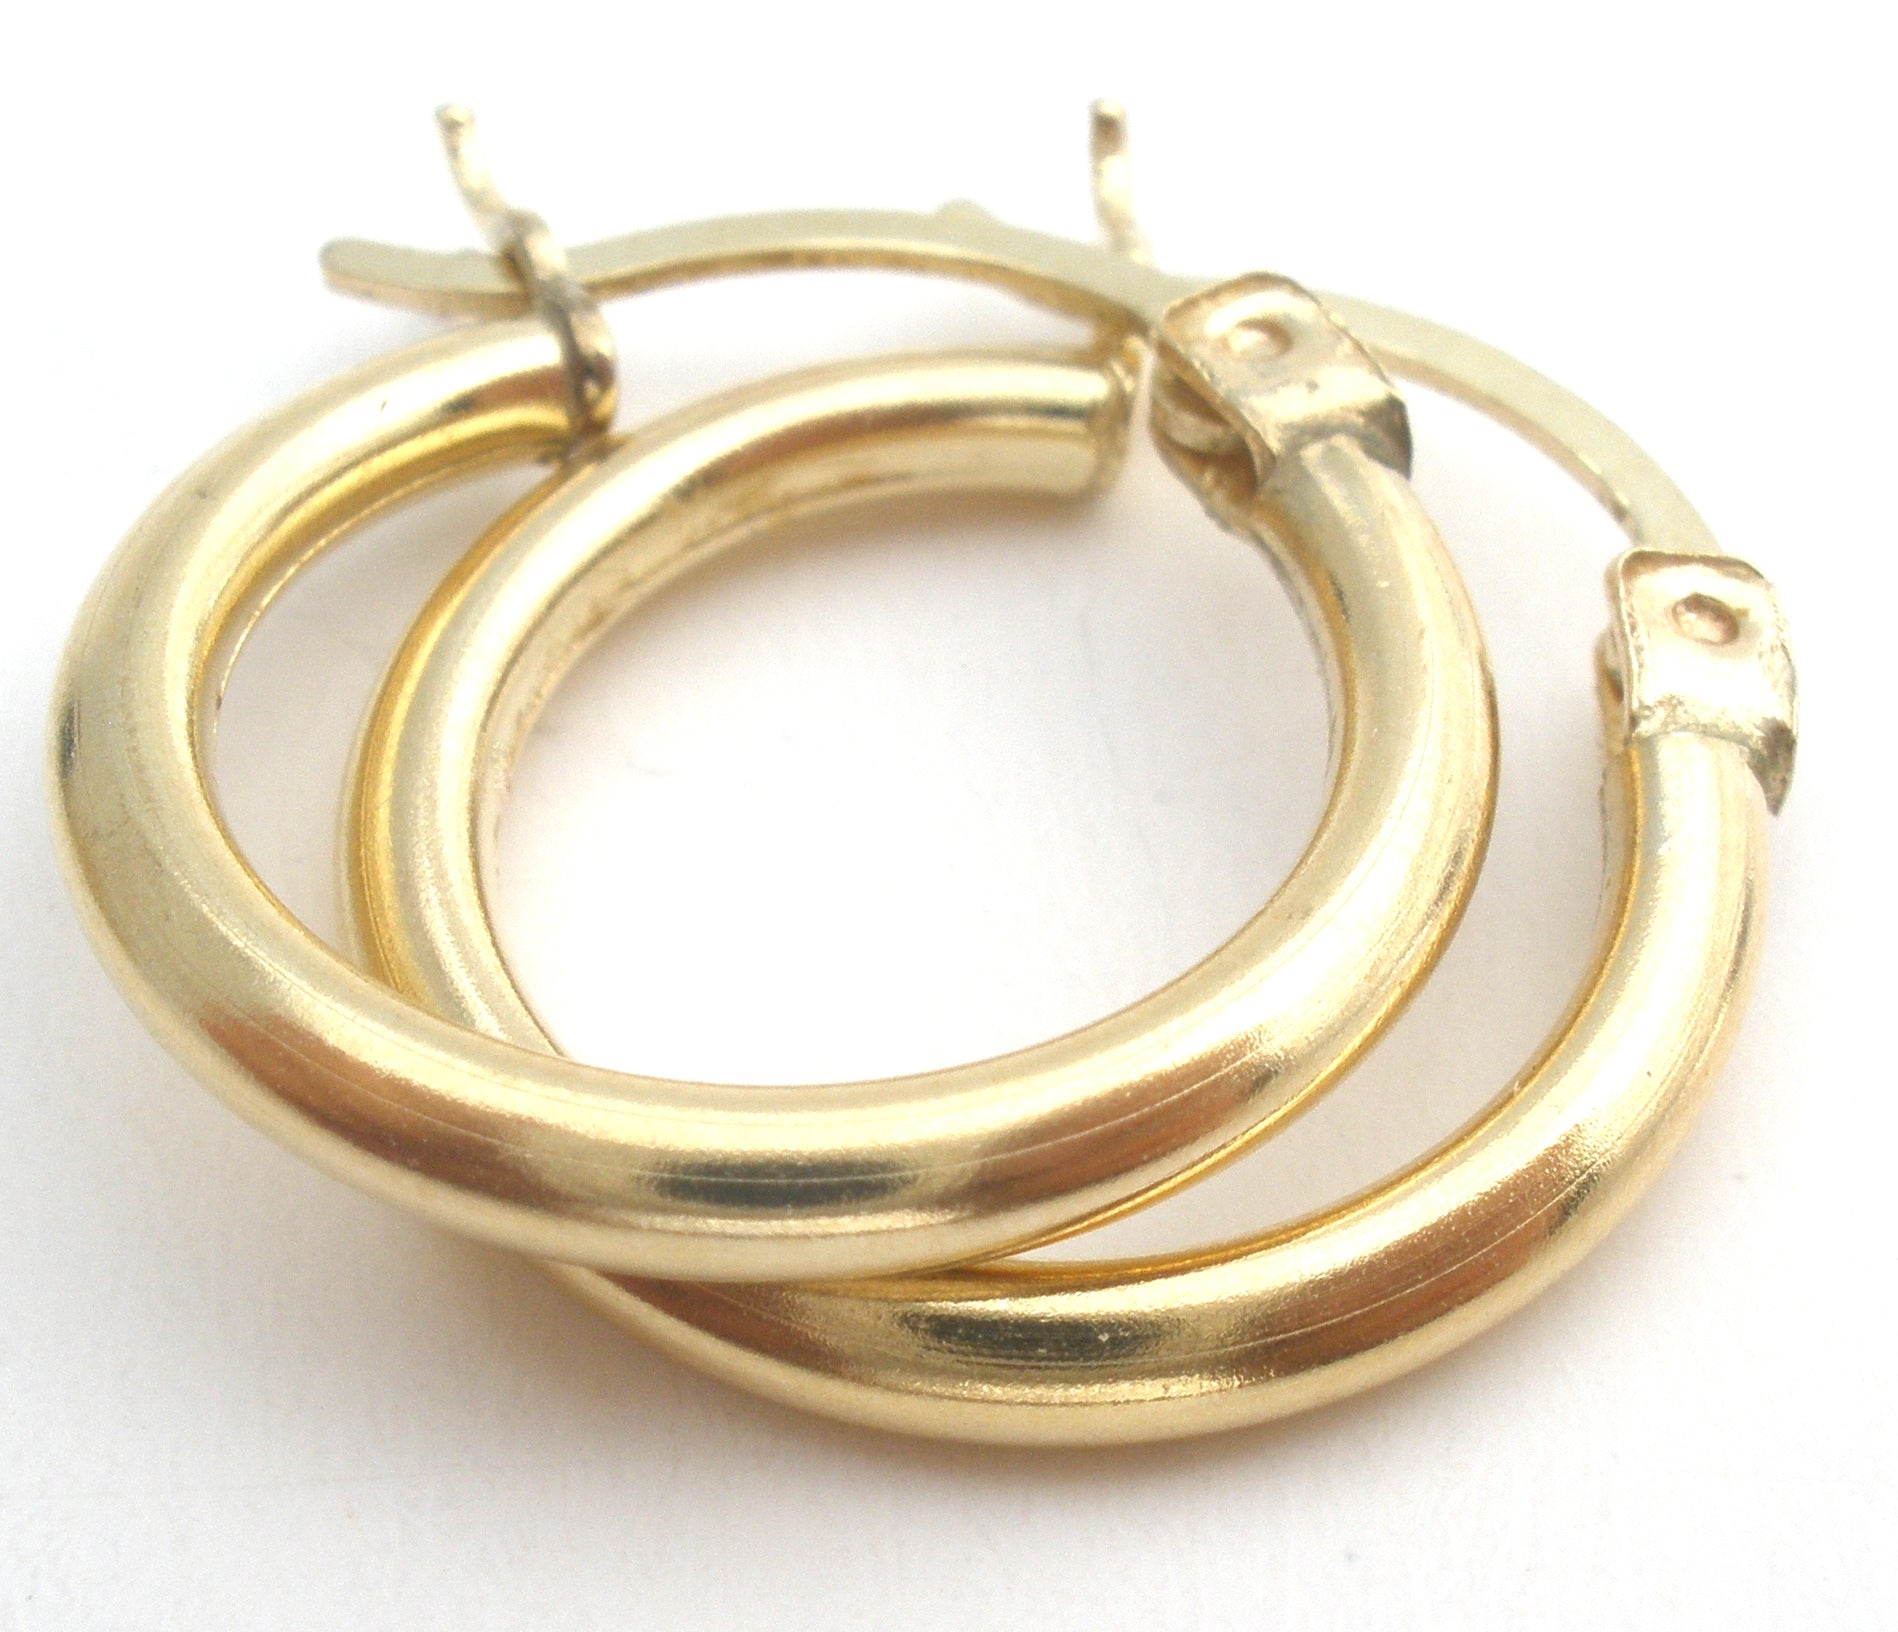 10K Yellow Gold Hoop Earrings – The Jewelry Lady's Store